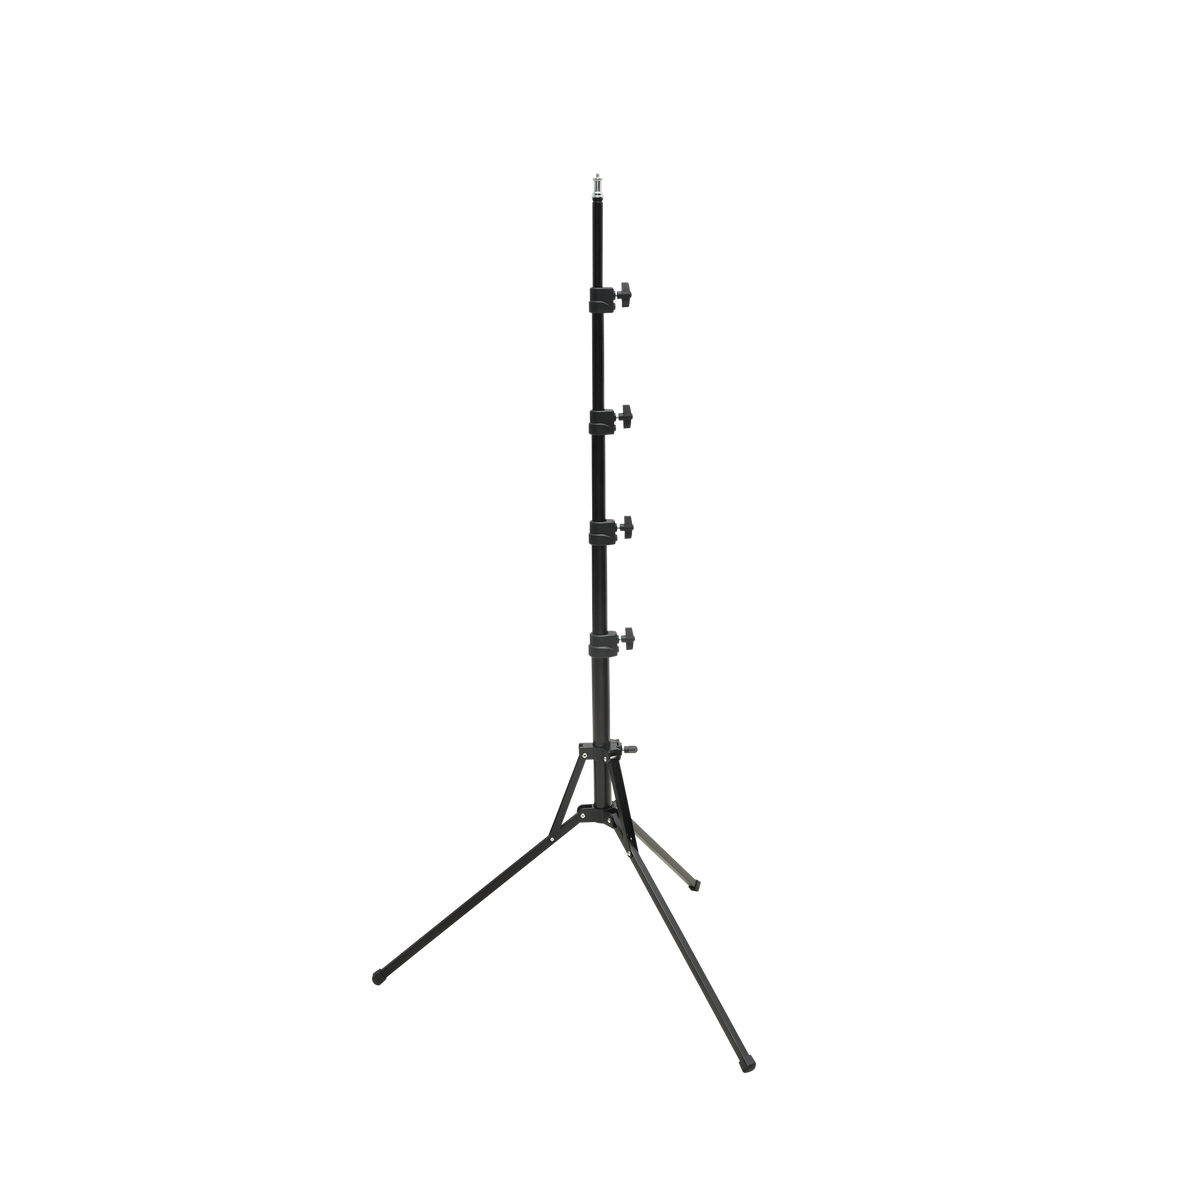 EQ-180 Compact Lamp Stand 47 - 180 cm